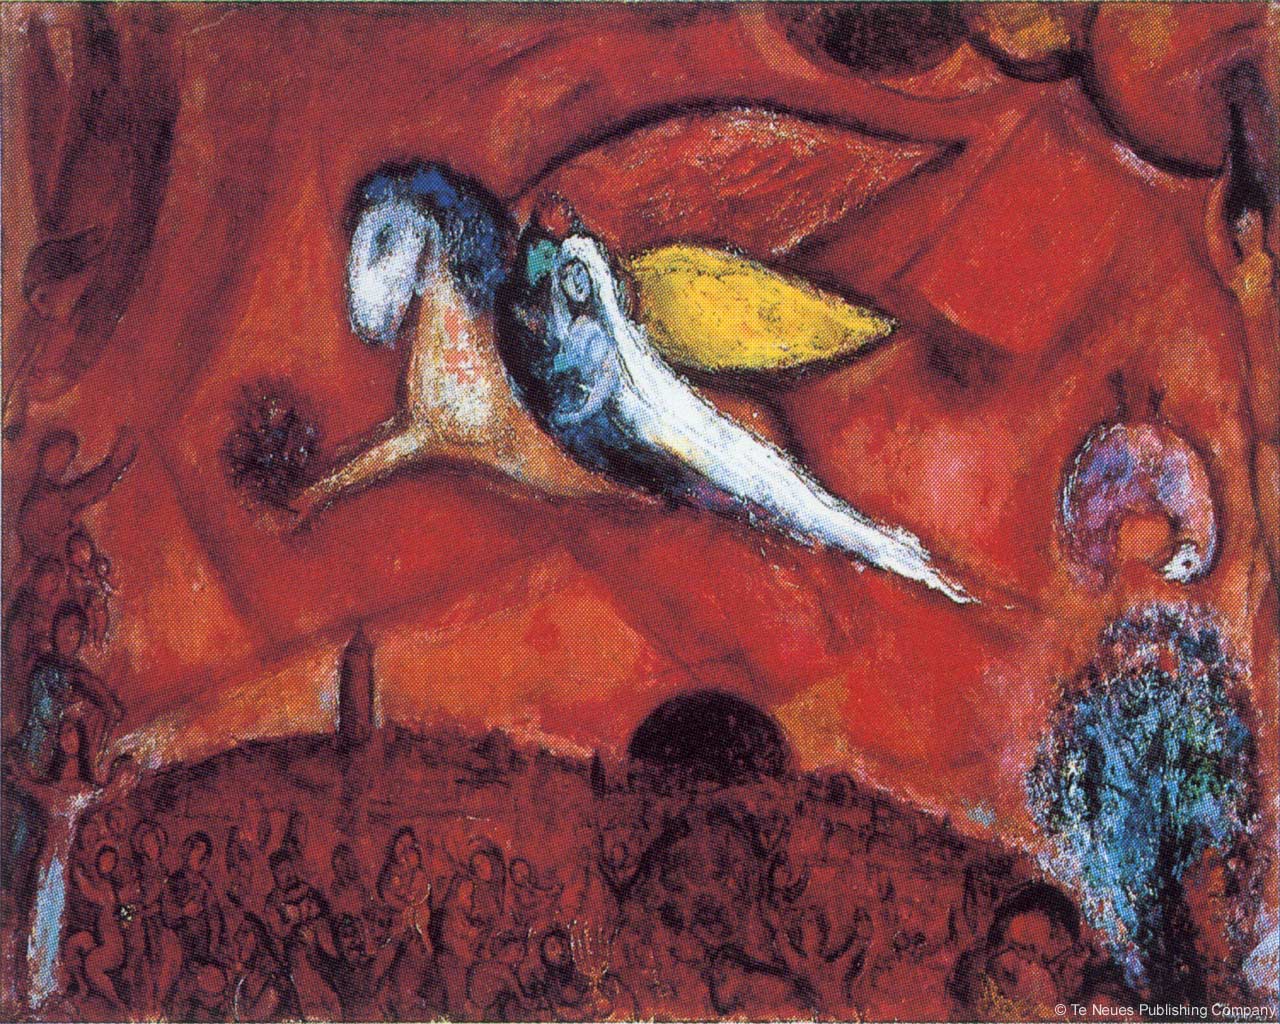 Song of Songs IV by Marc Chagall - 1958 - 43 x 28 cm Musée national Message Biblique Marc Chagall